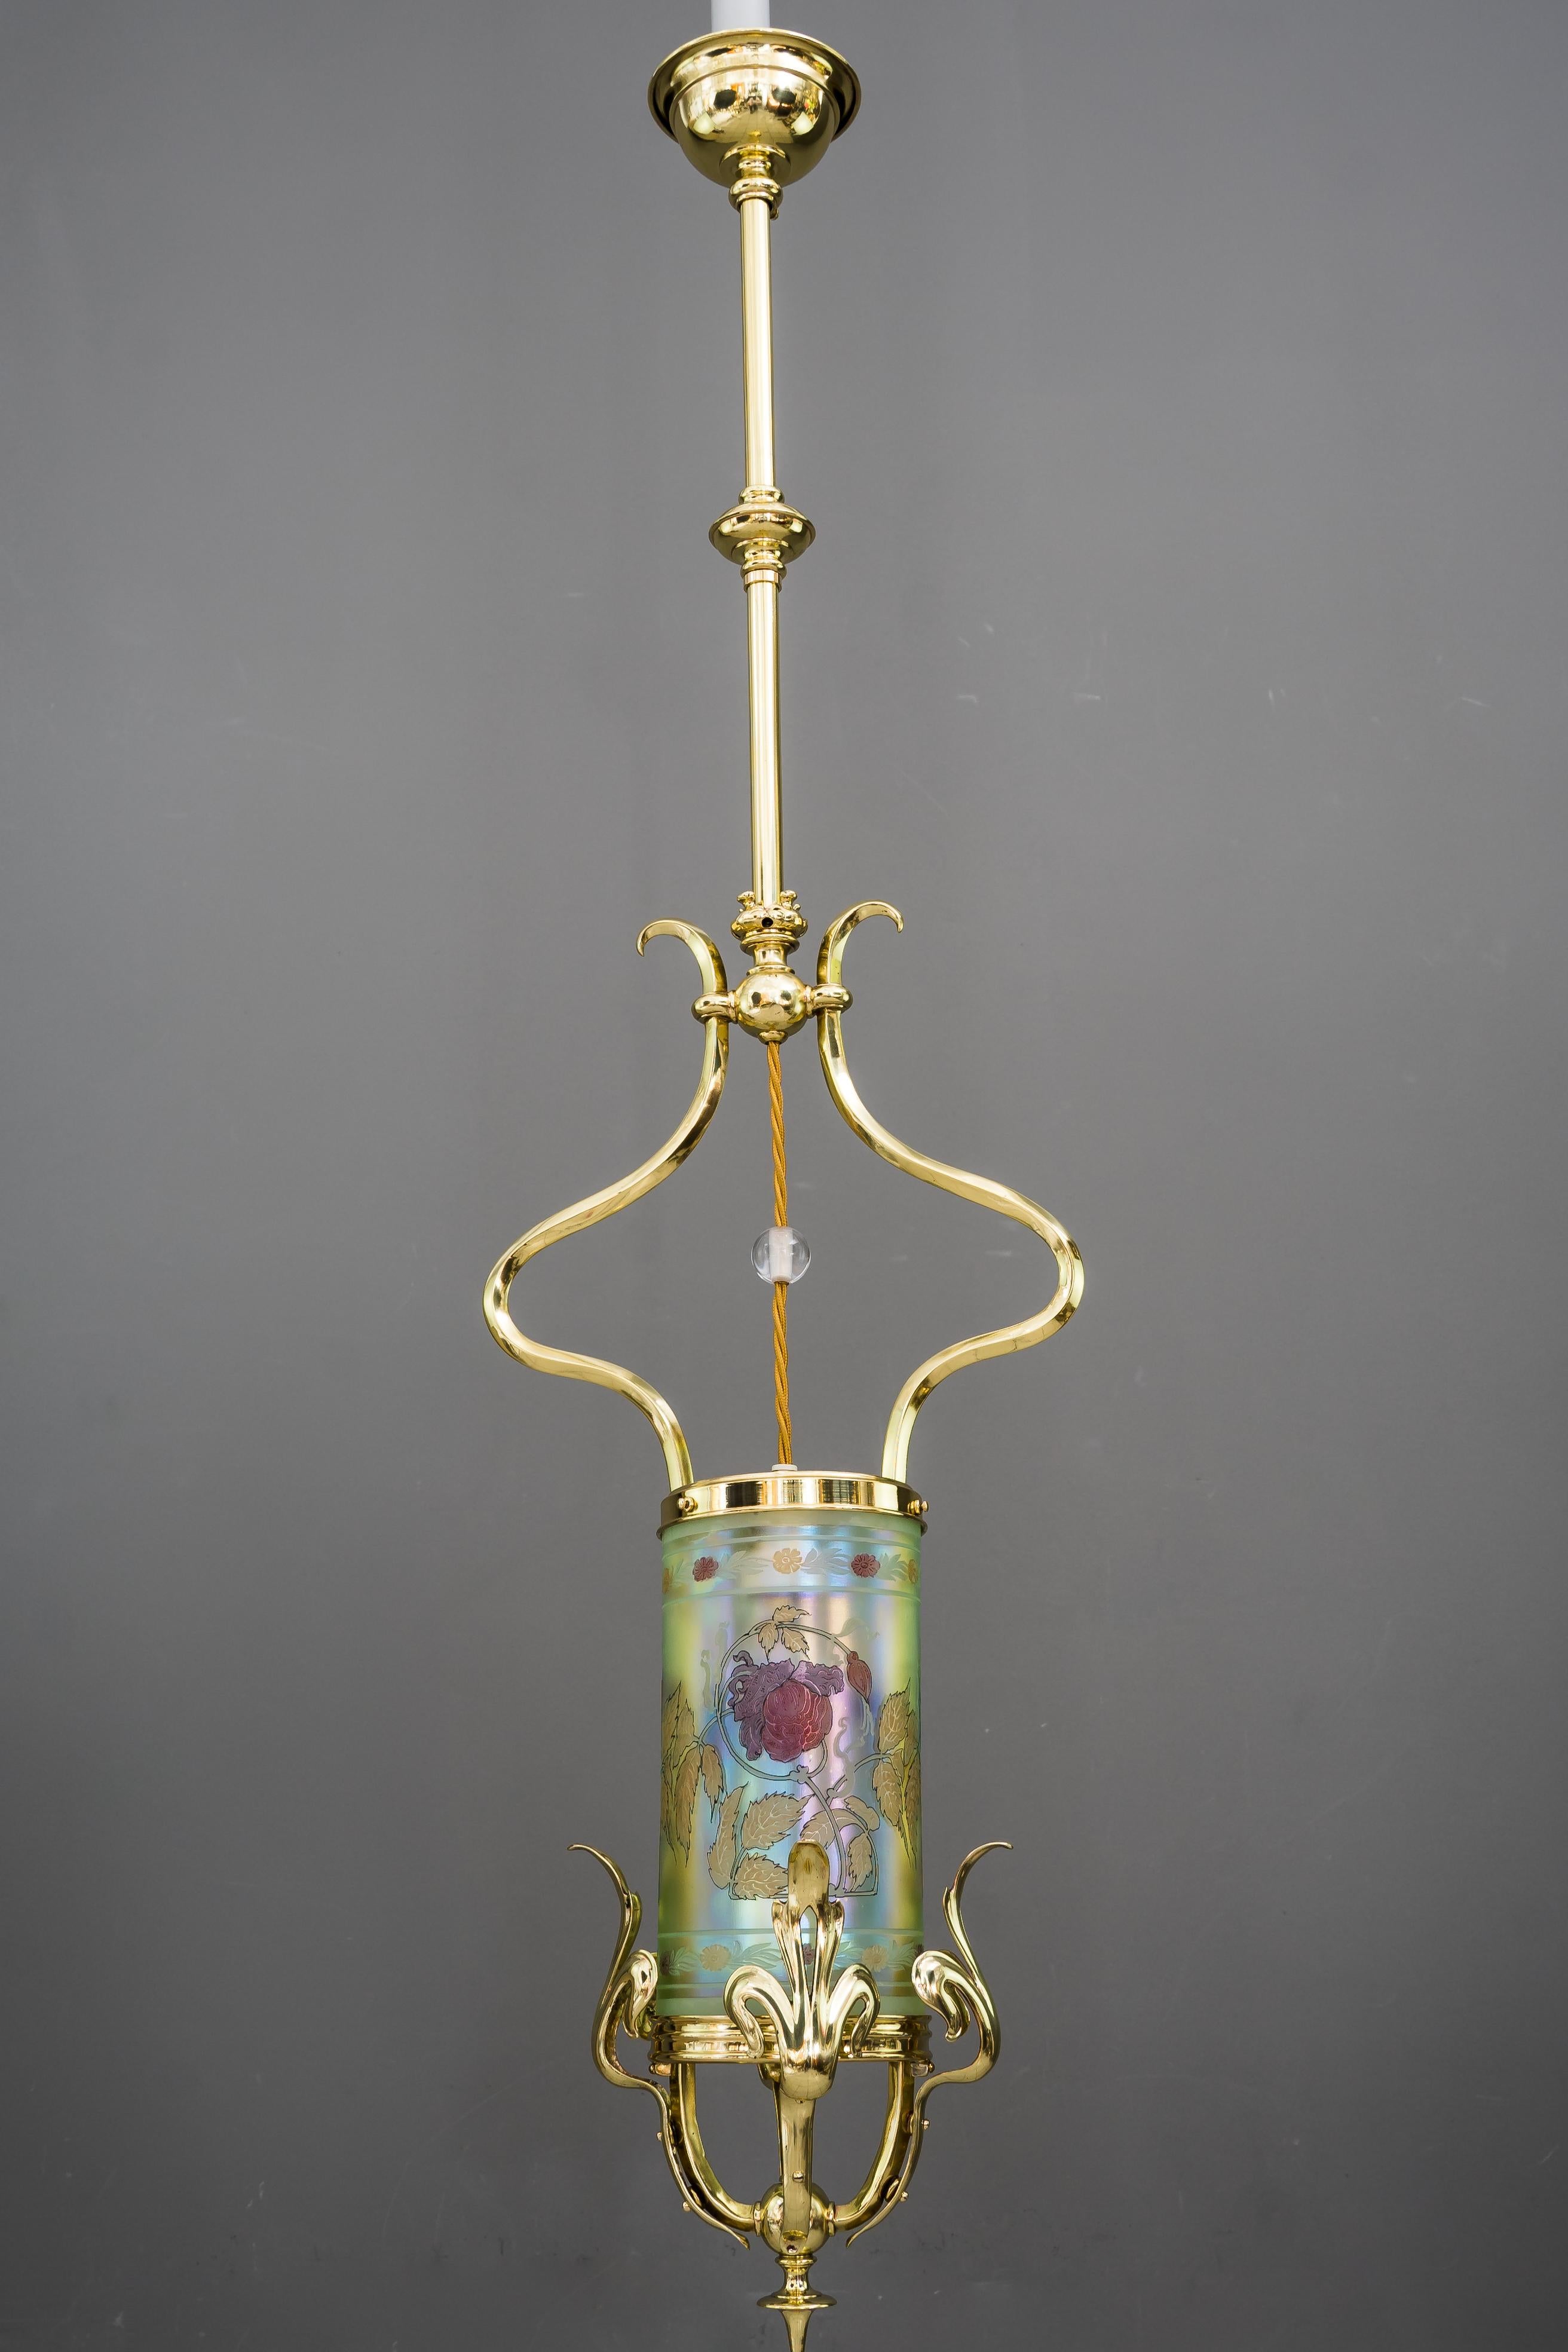 Jugendstil pendant vienna around 1909
Brass polished and stove enamelled
Painted glass shade.